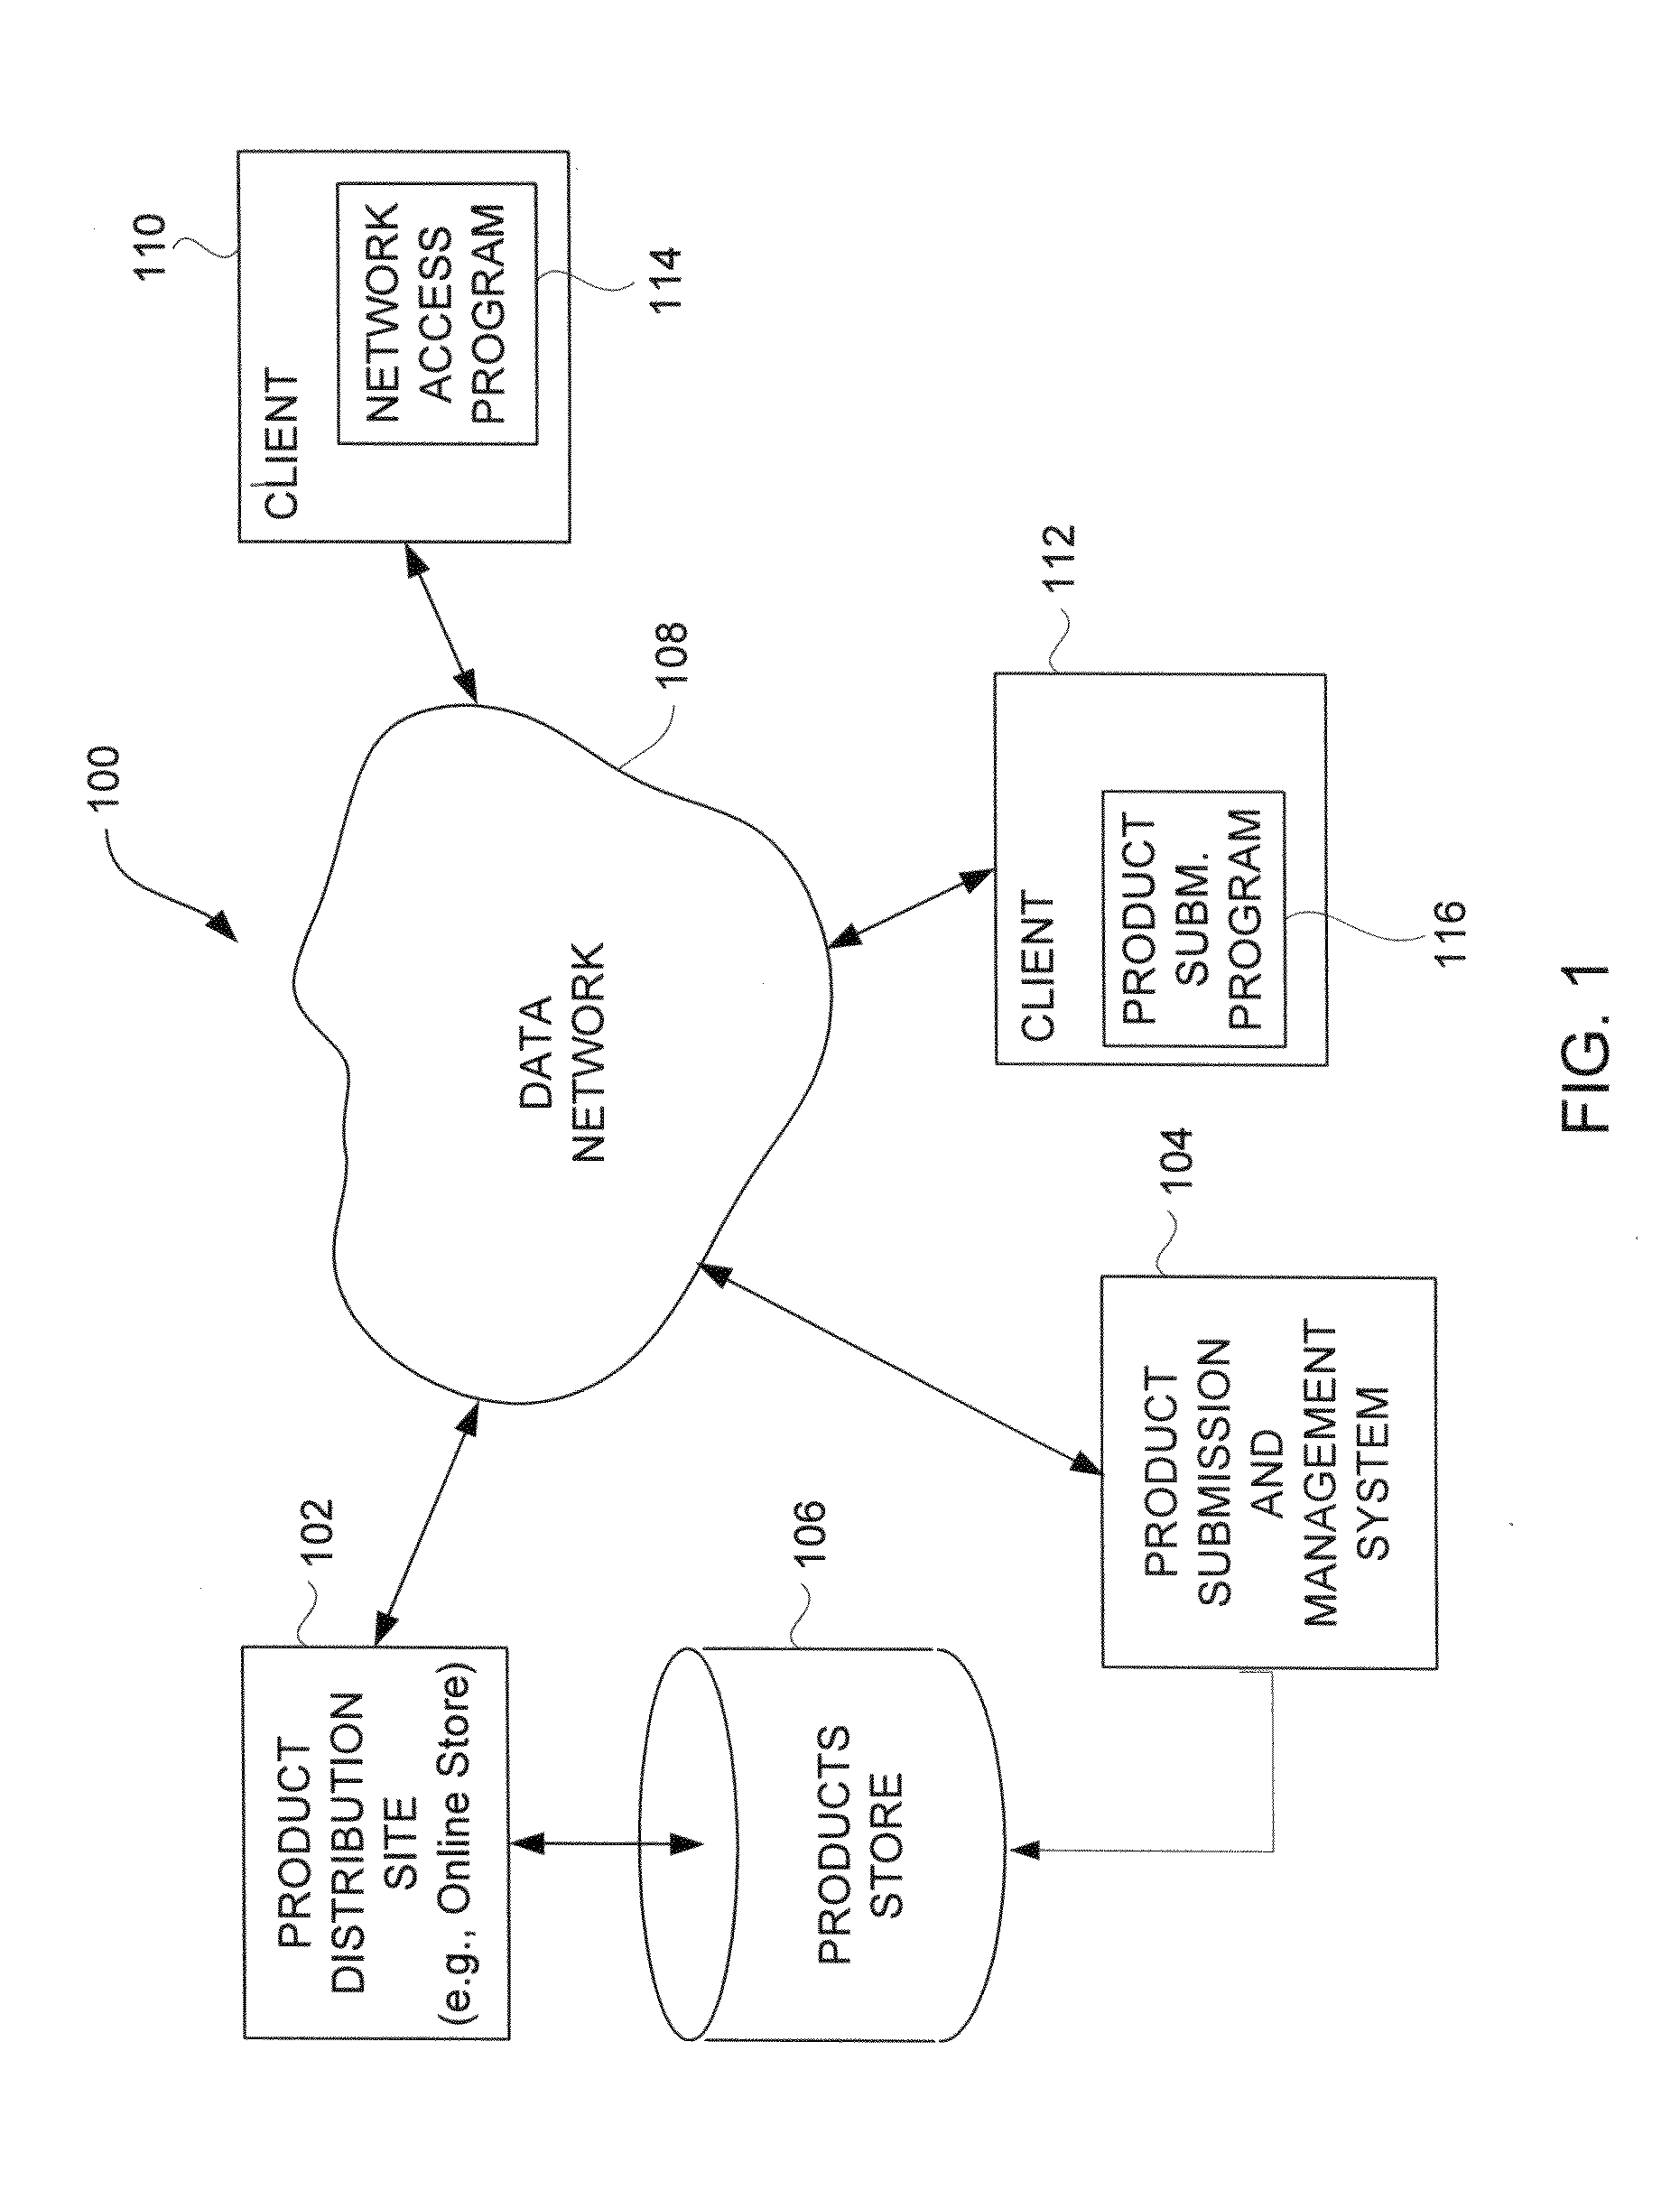 Electronic submission of application programs for network-based distribution